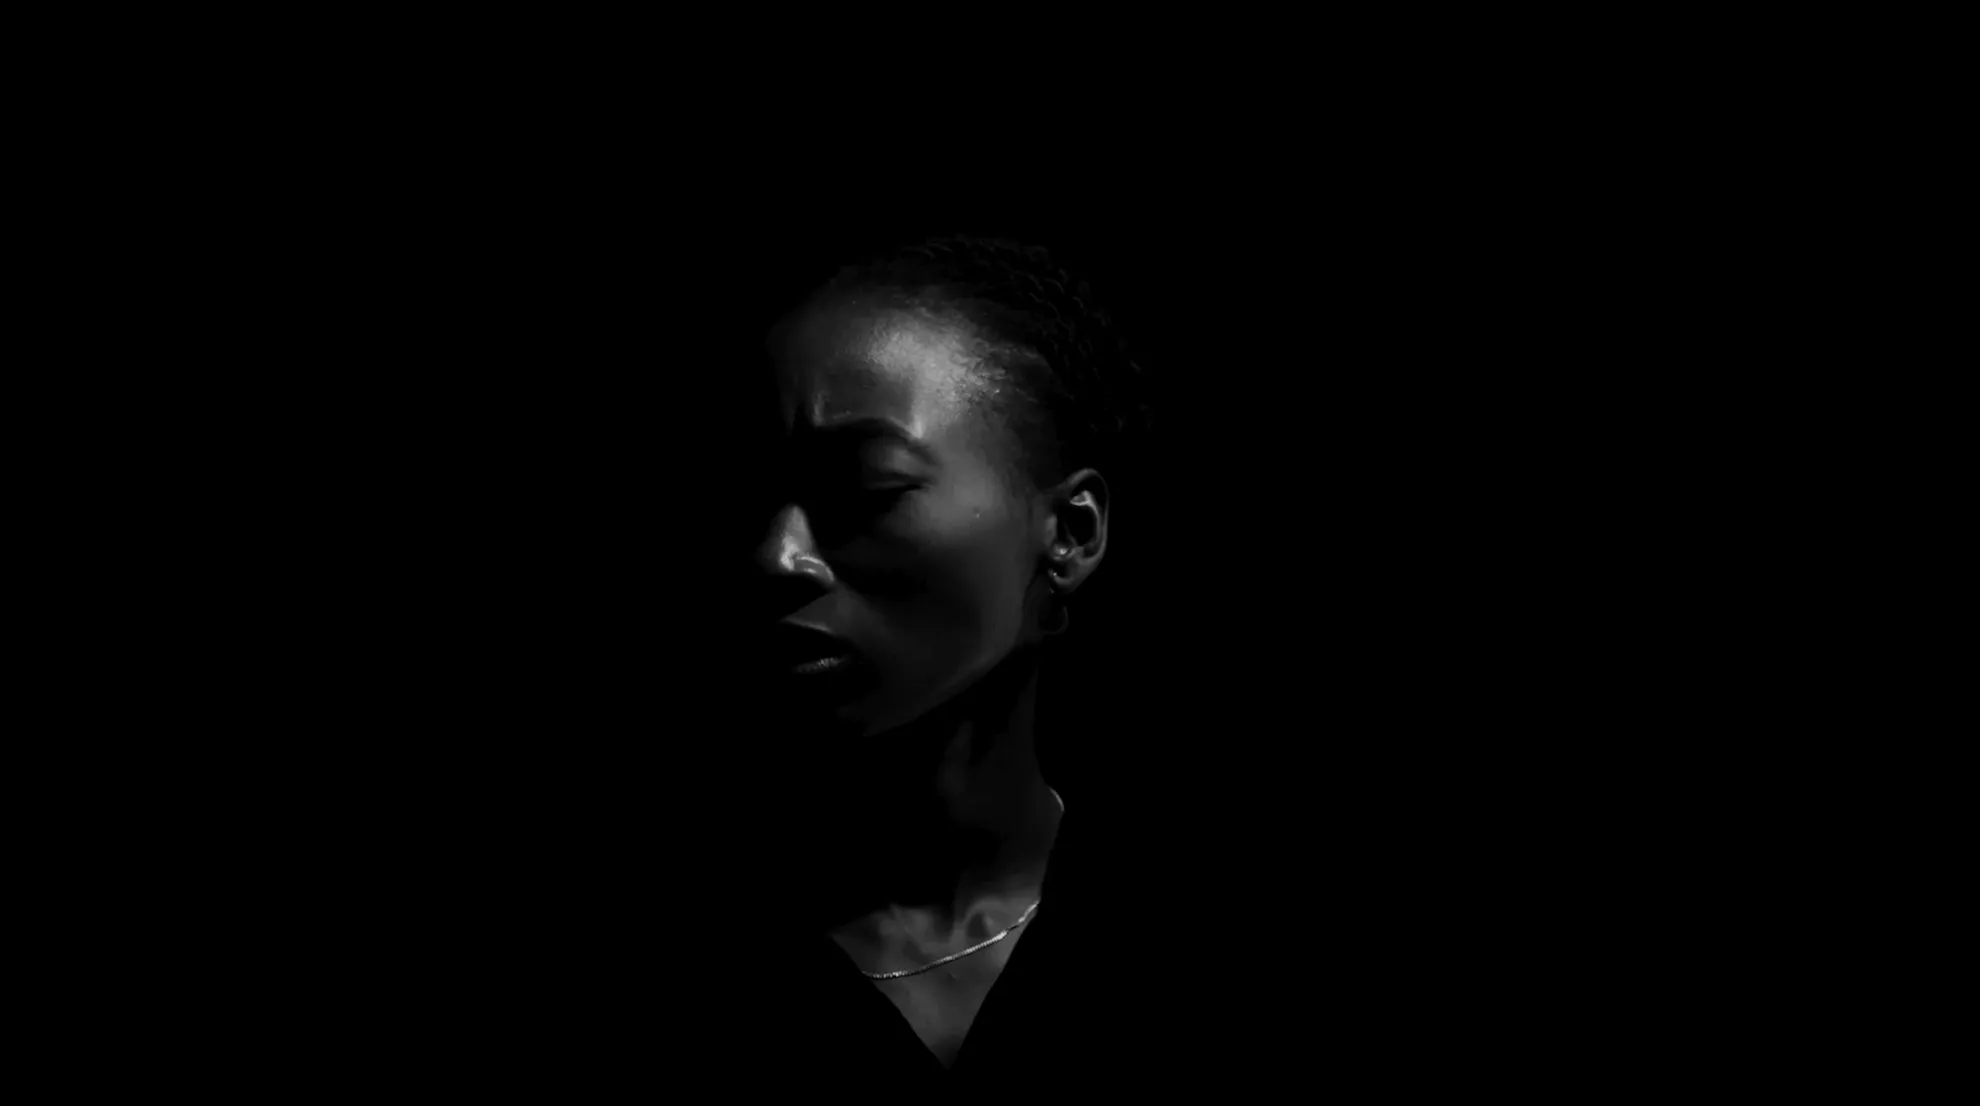 A woman's face surrounded by darkness, slightly turned.